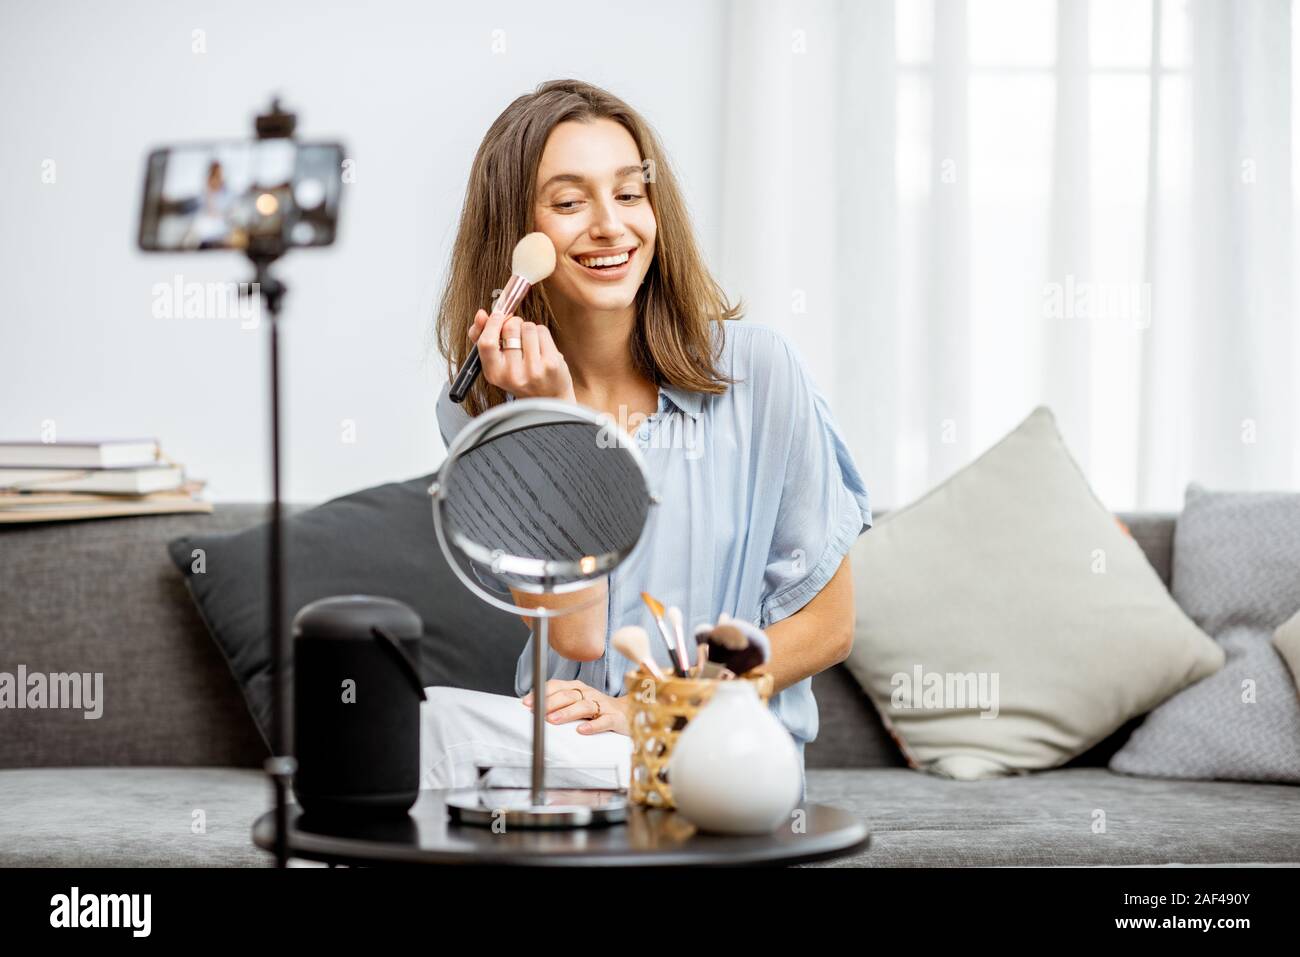 Young woman recording on a smart phone her vlog about cosmetics, showing and demonstrating makeup. Influencer marketing in social media concept Stock Photo